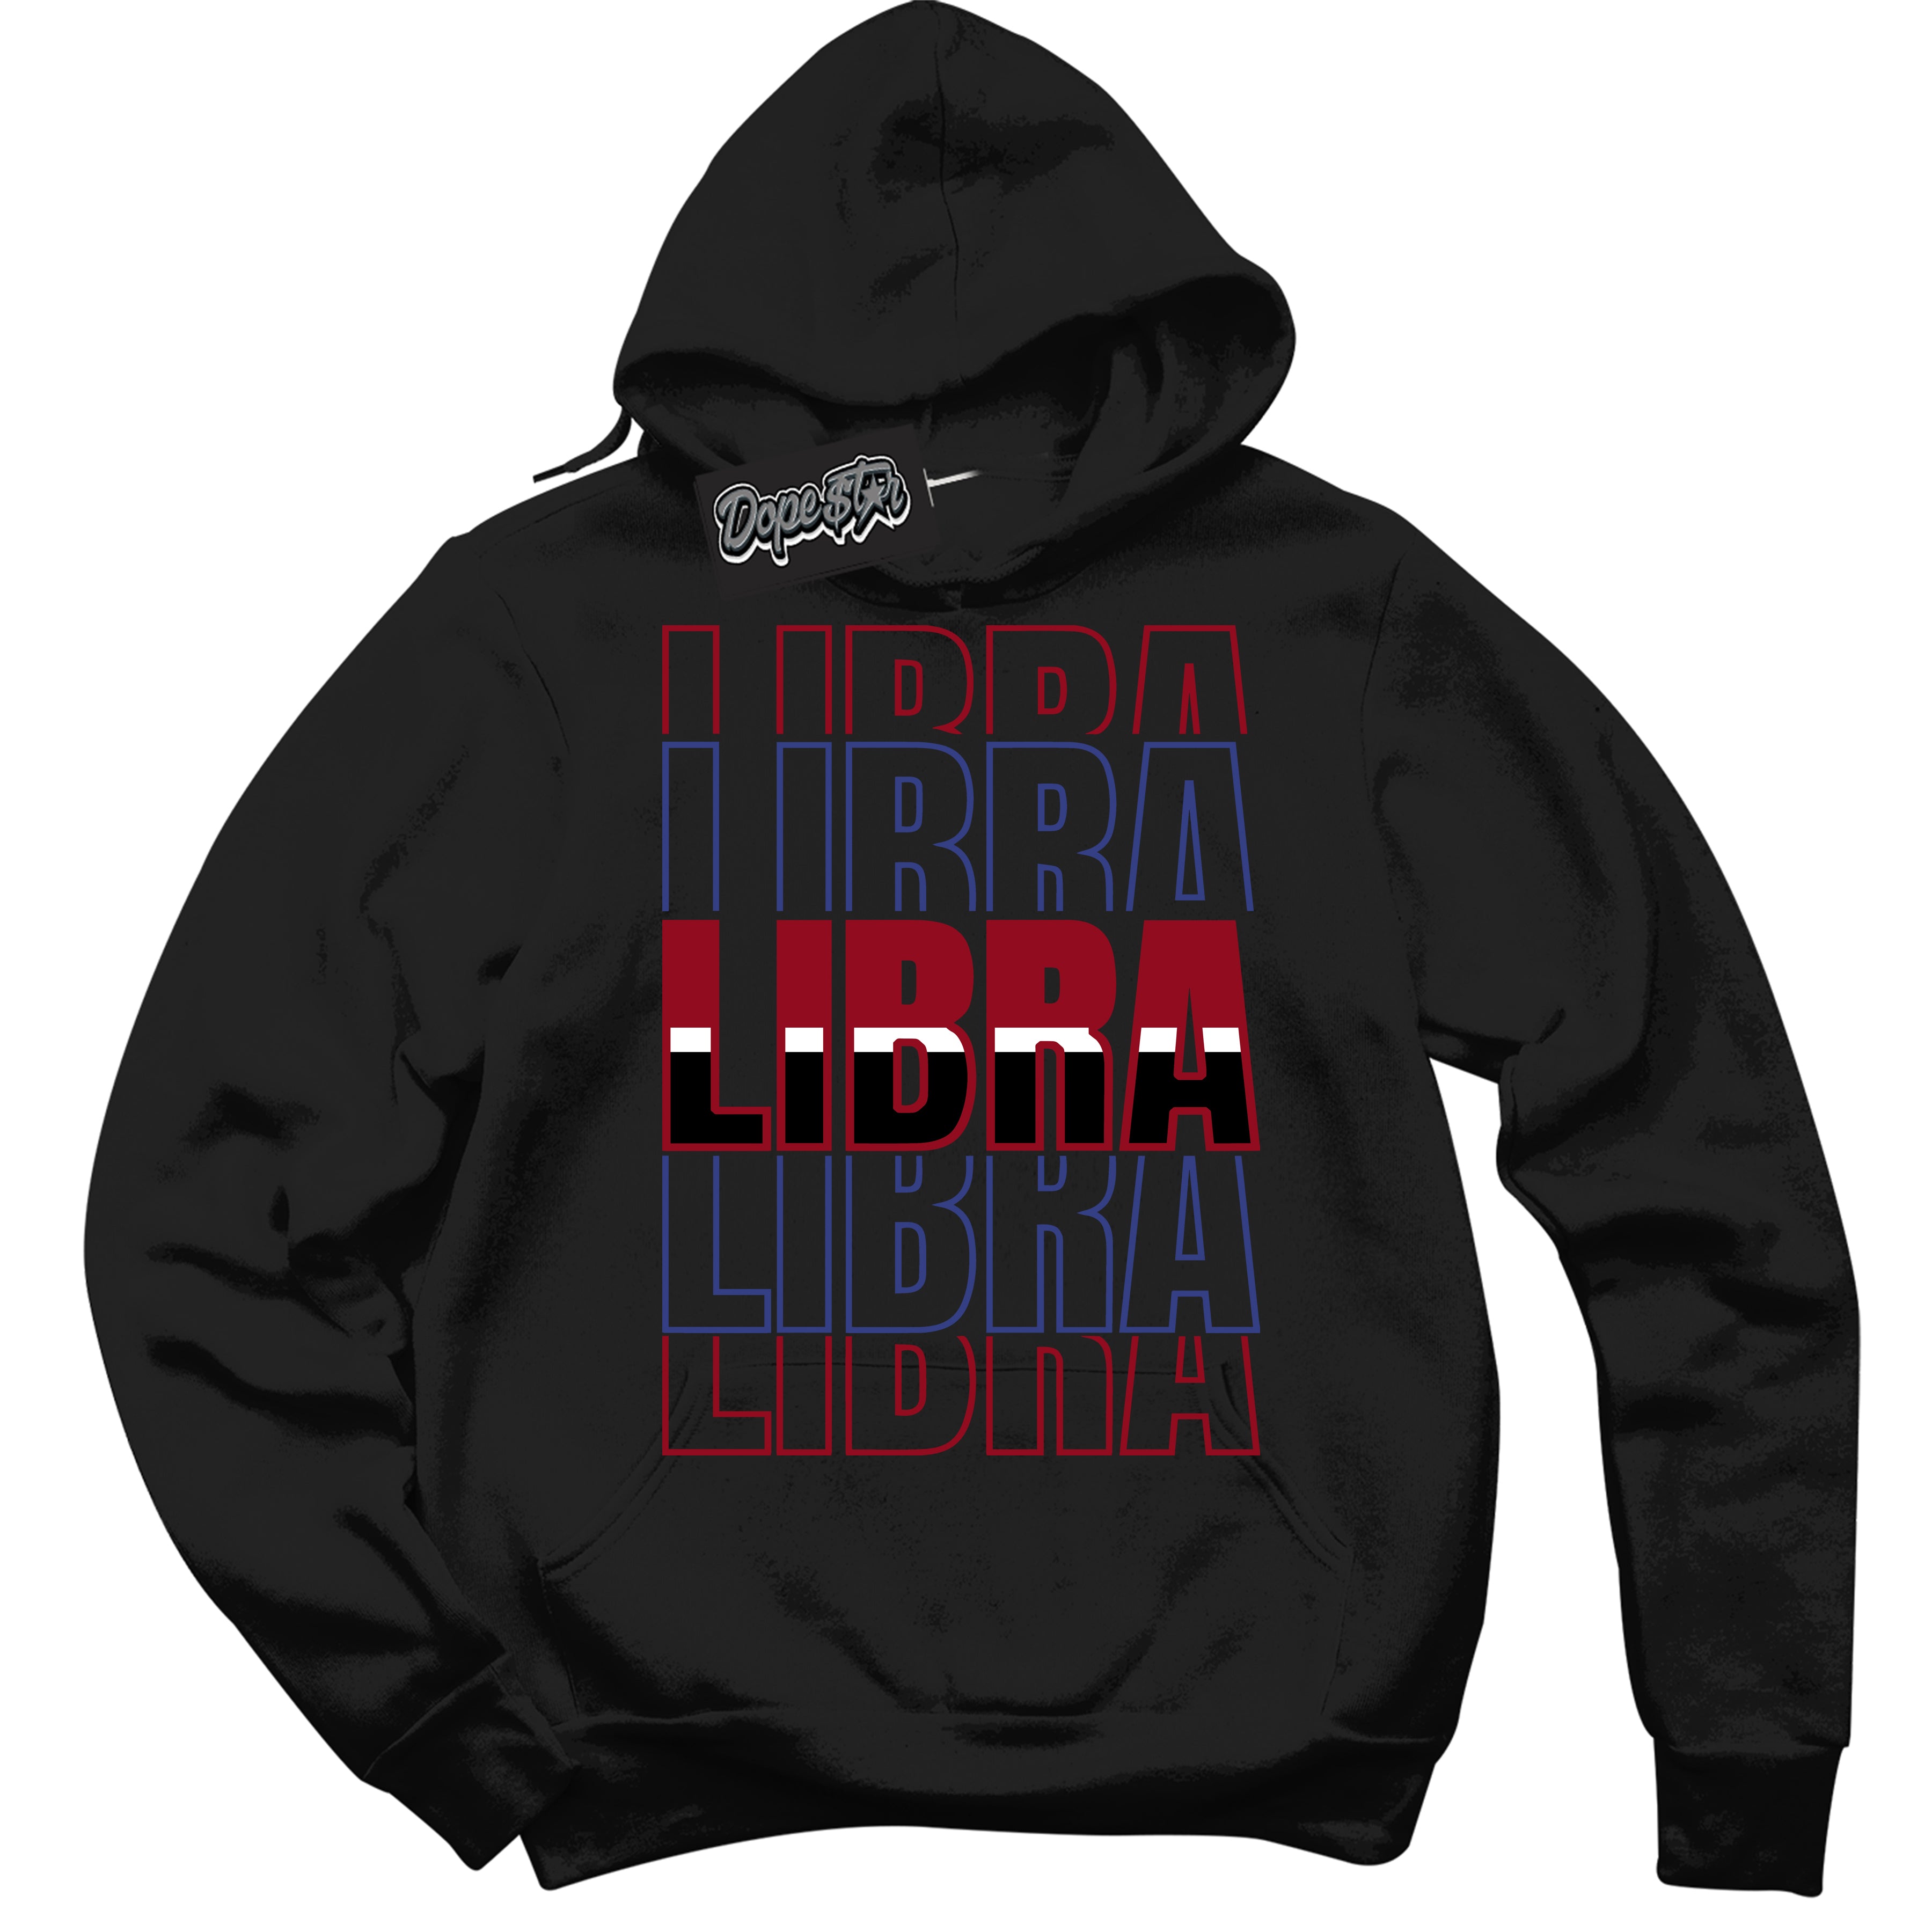 Cool Black Hoodie with “ Libra ”  design that Perfectly Matches Playoffs 8s Sneakers.